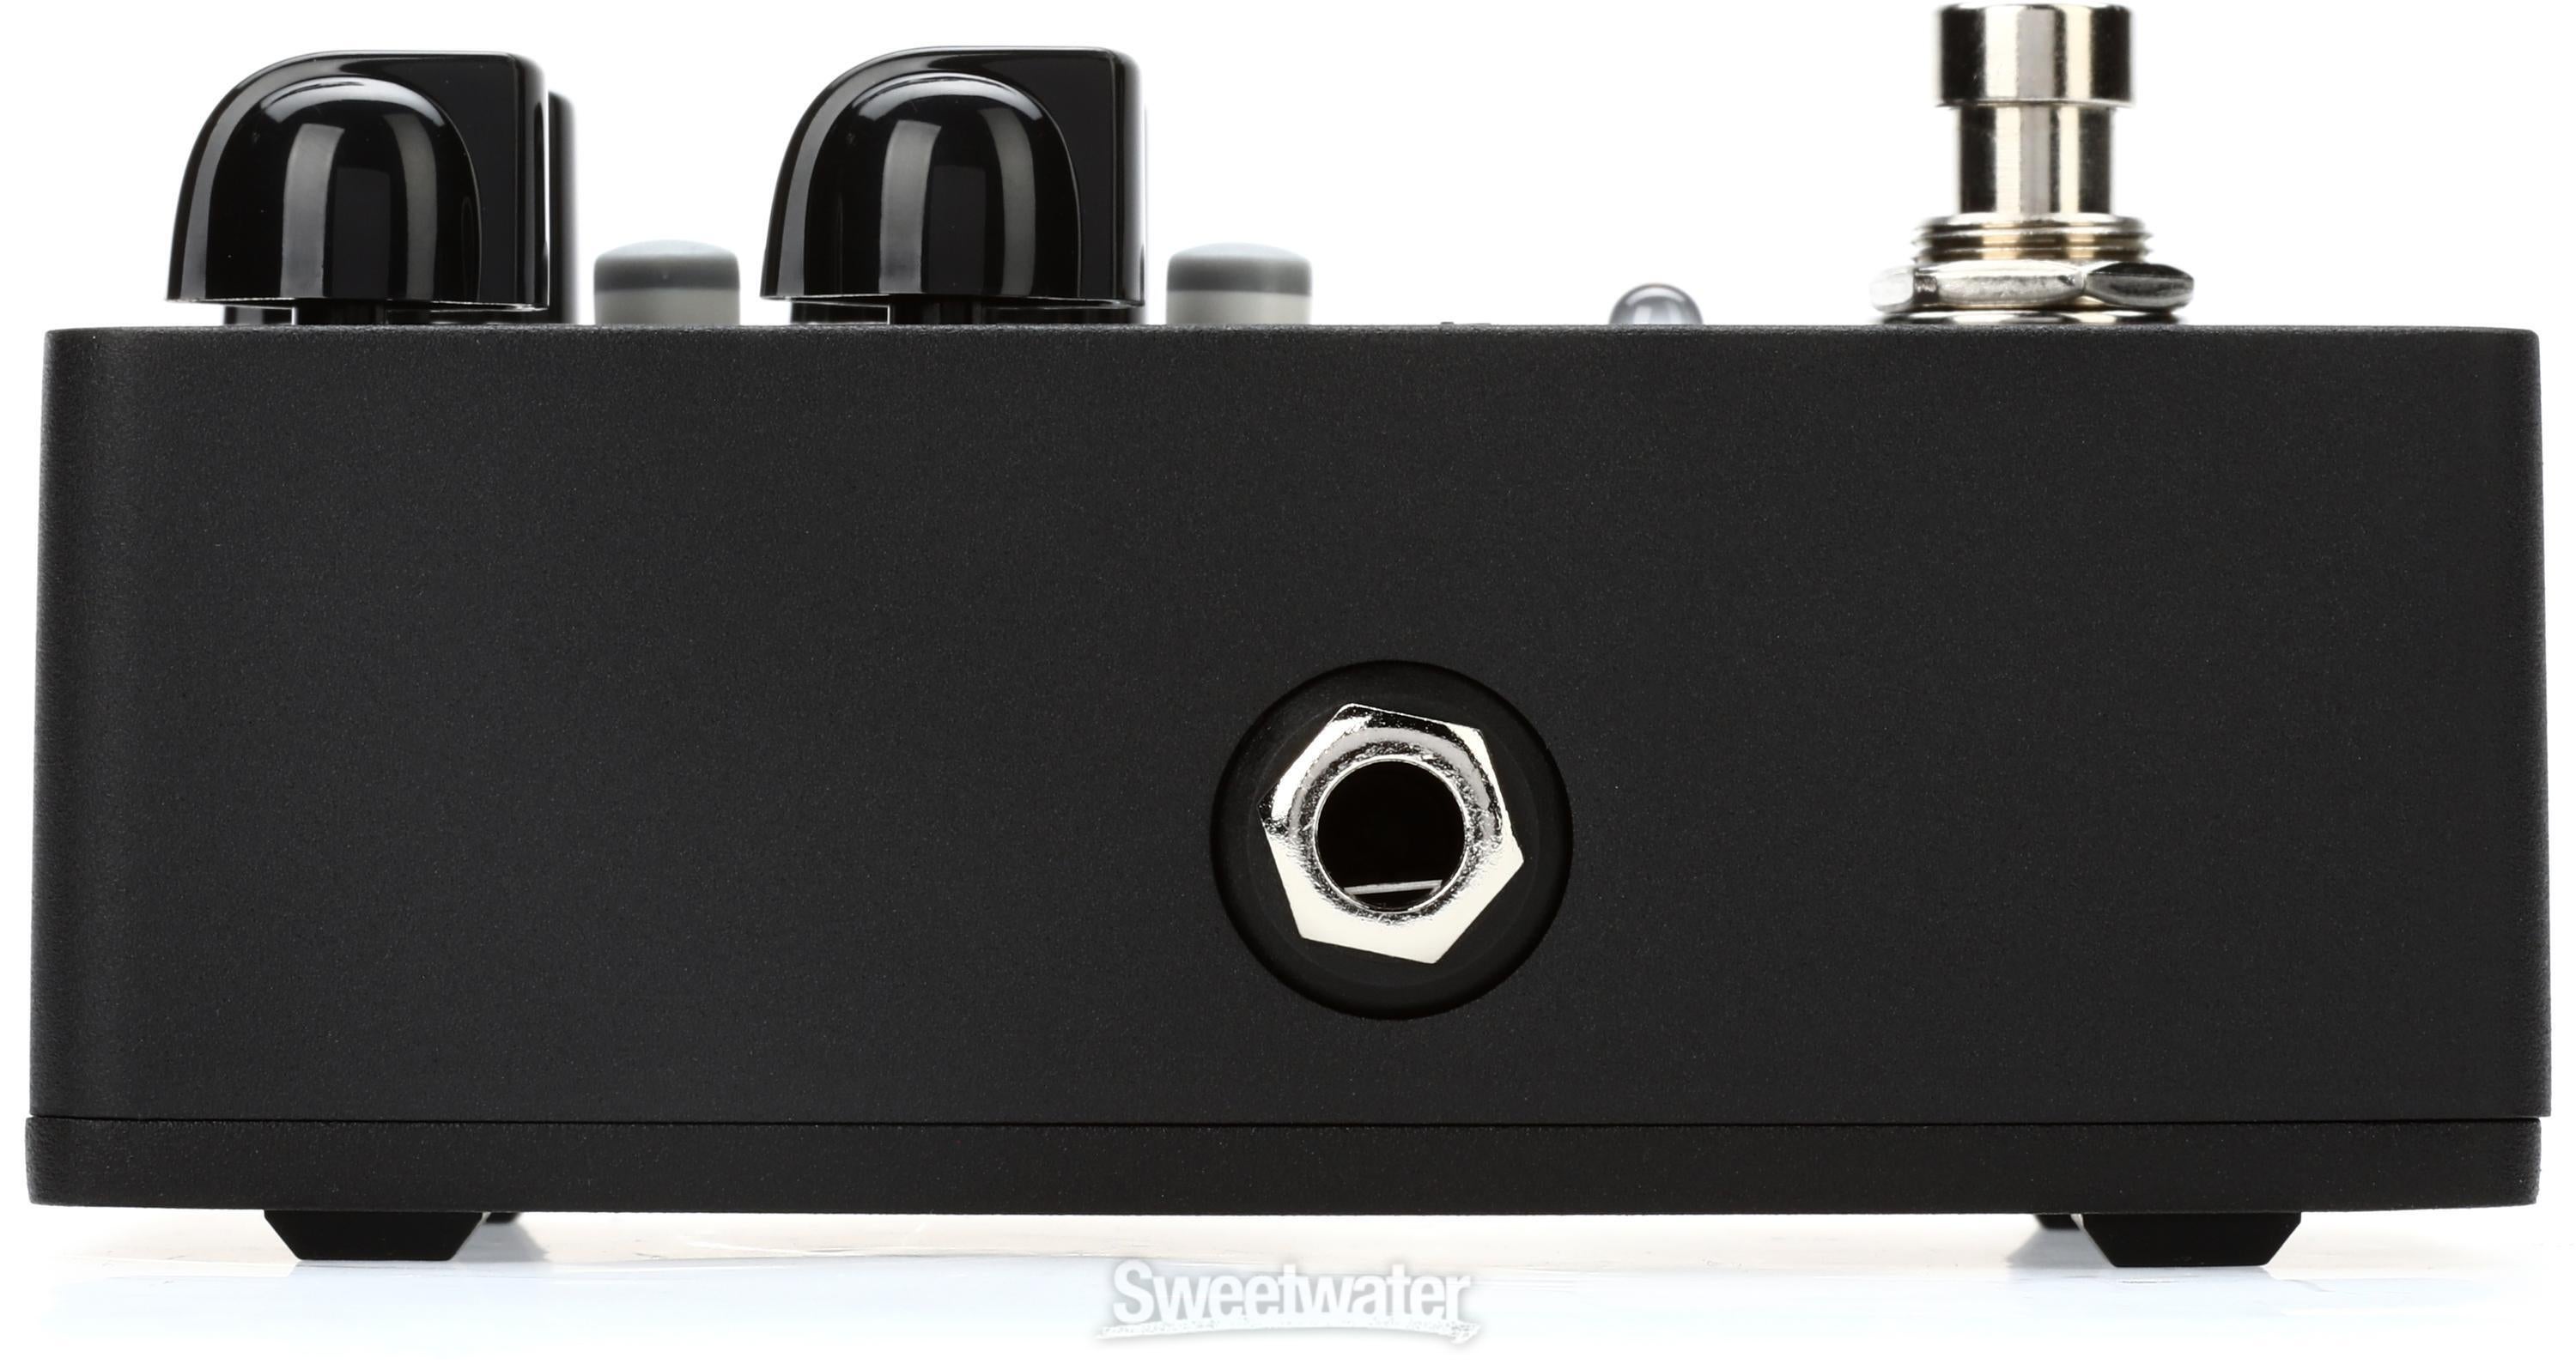 Ampeg Classic Analog Bass Preamp Pedal Reviews | Sweetwater